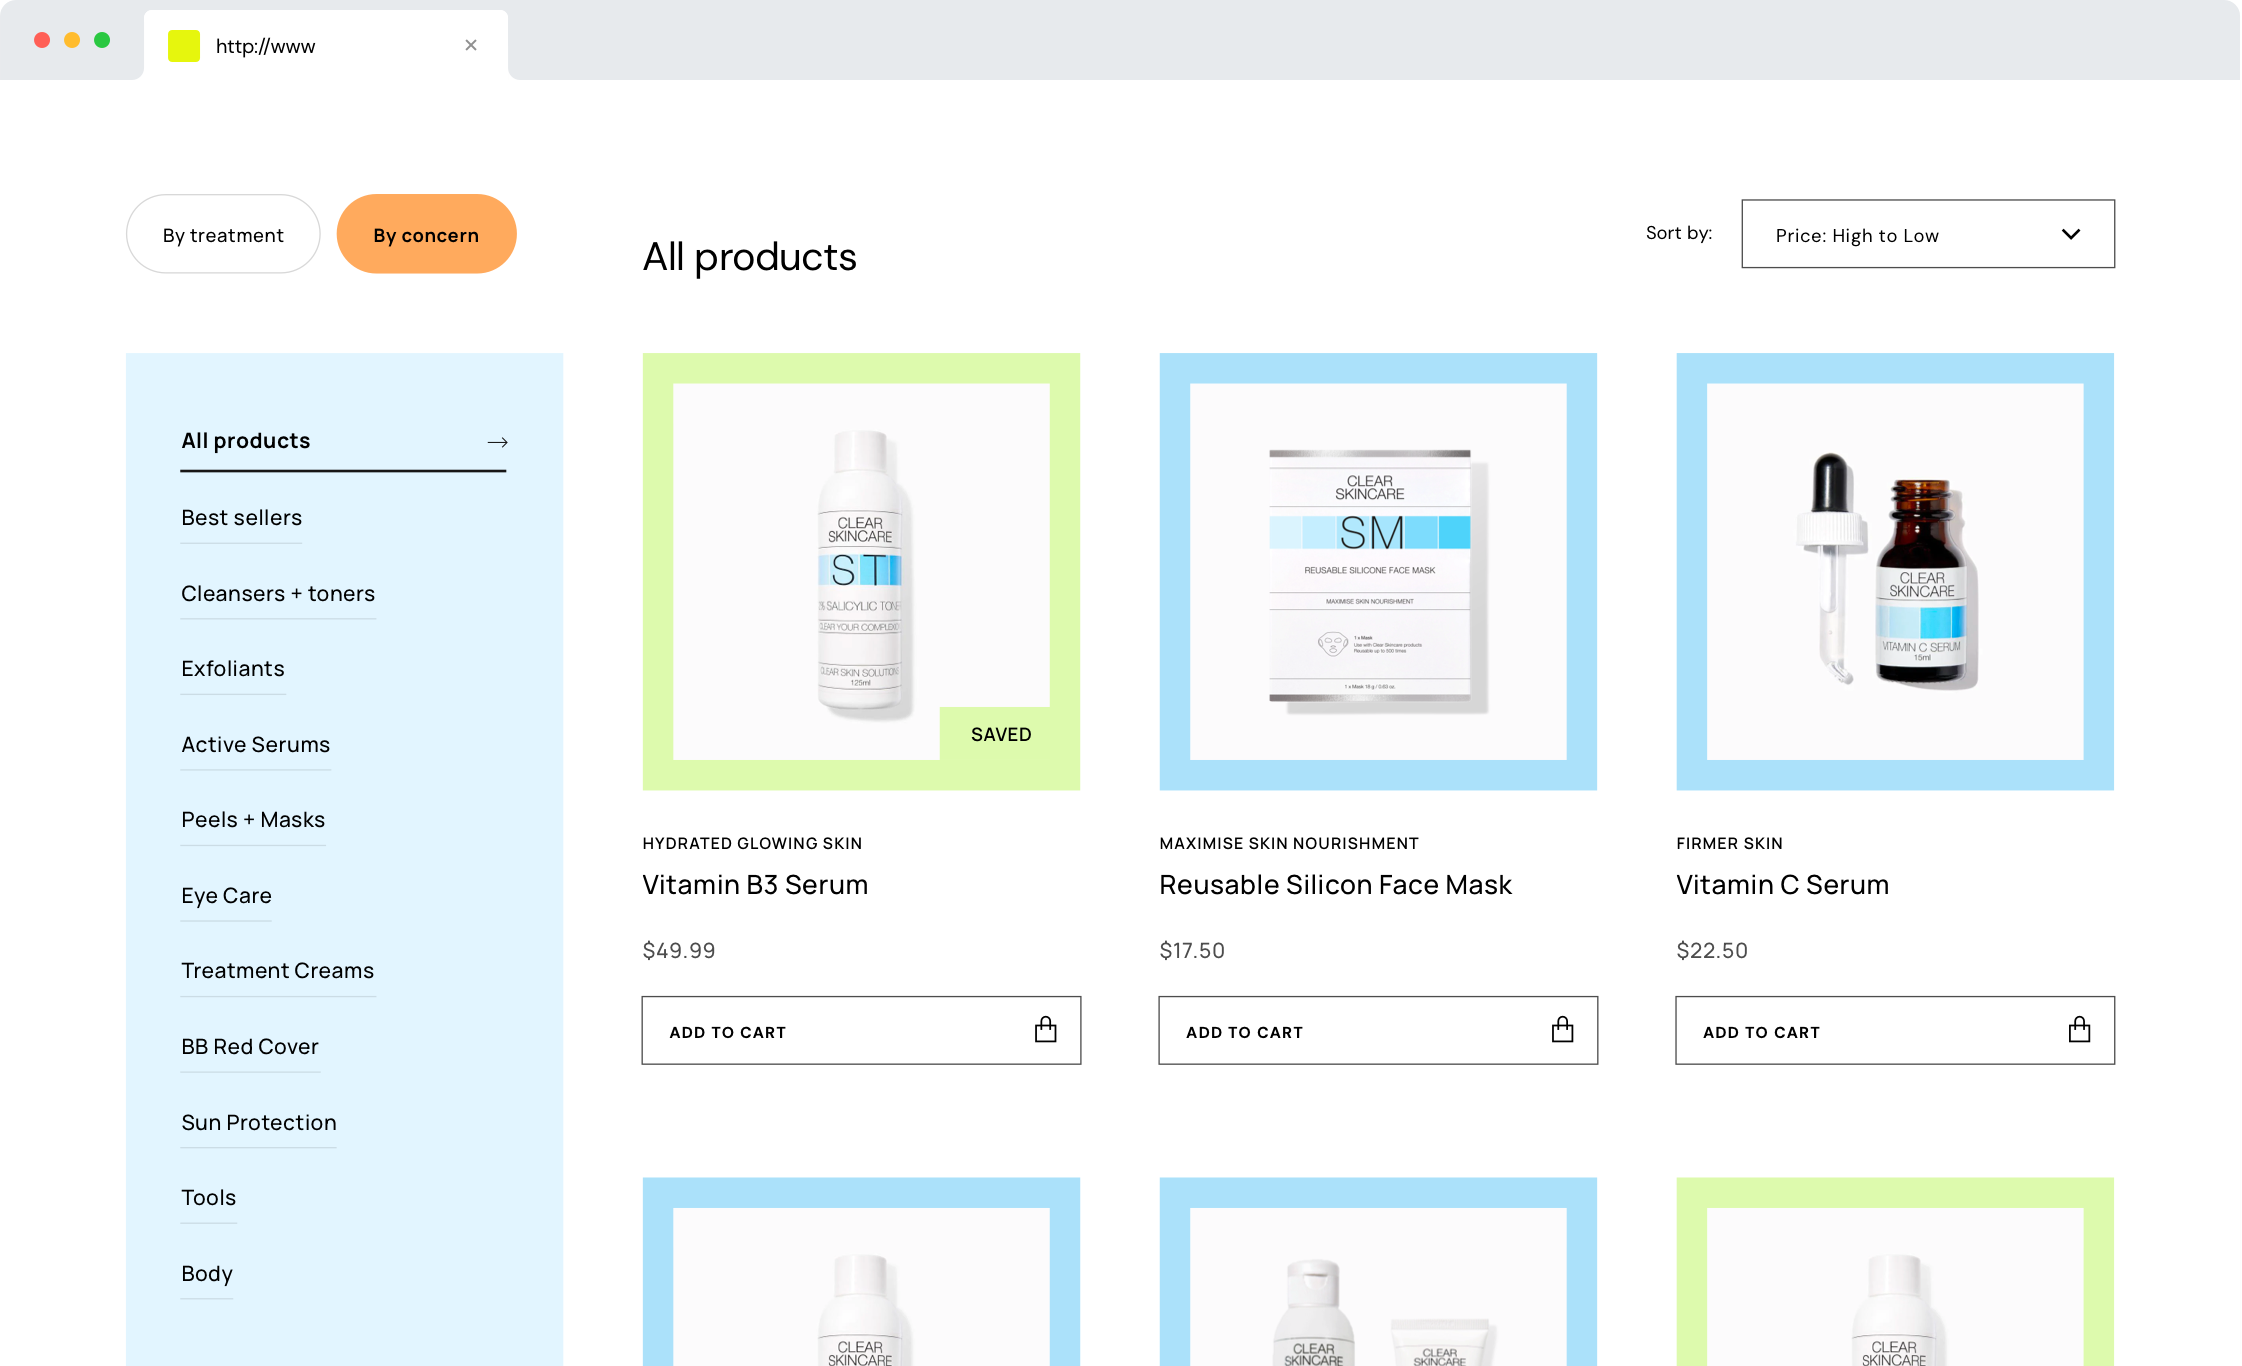 Clear Skincare online store with skincare products